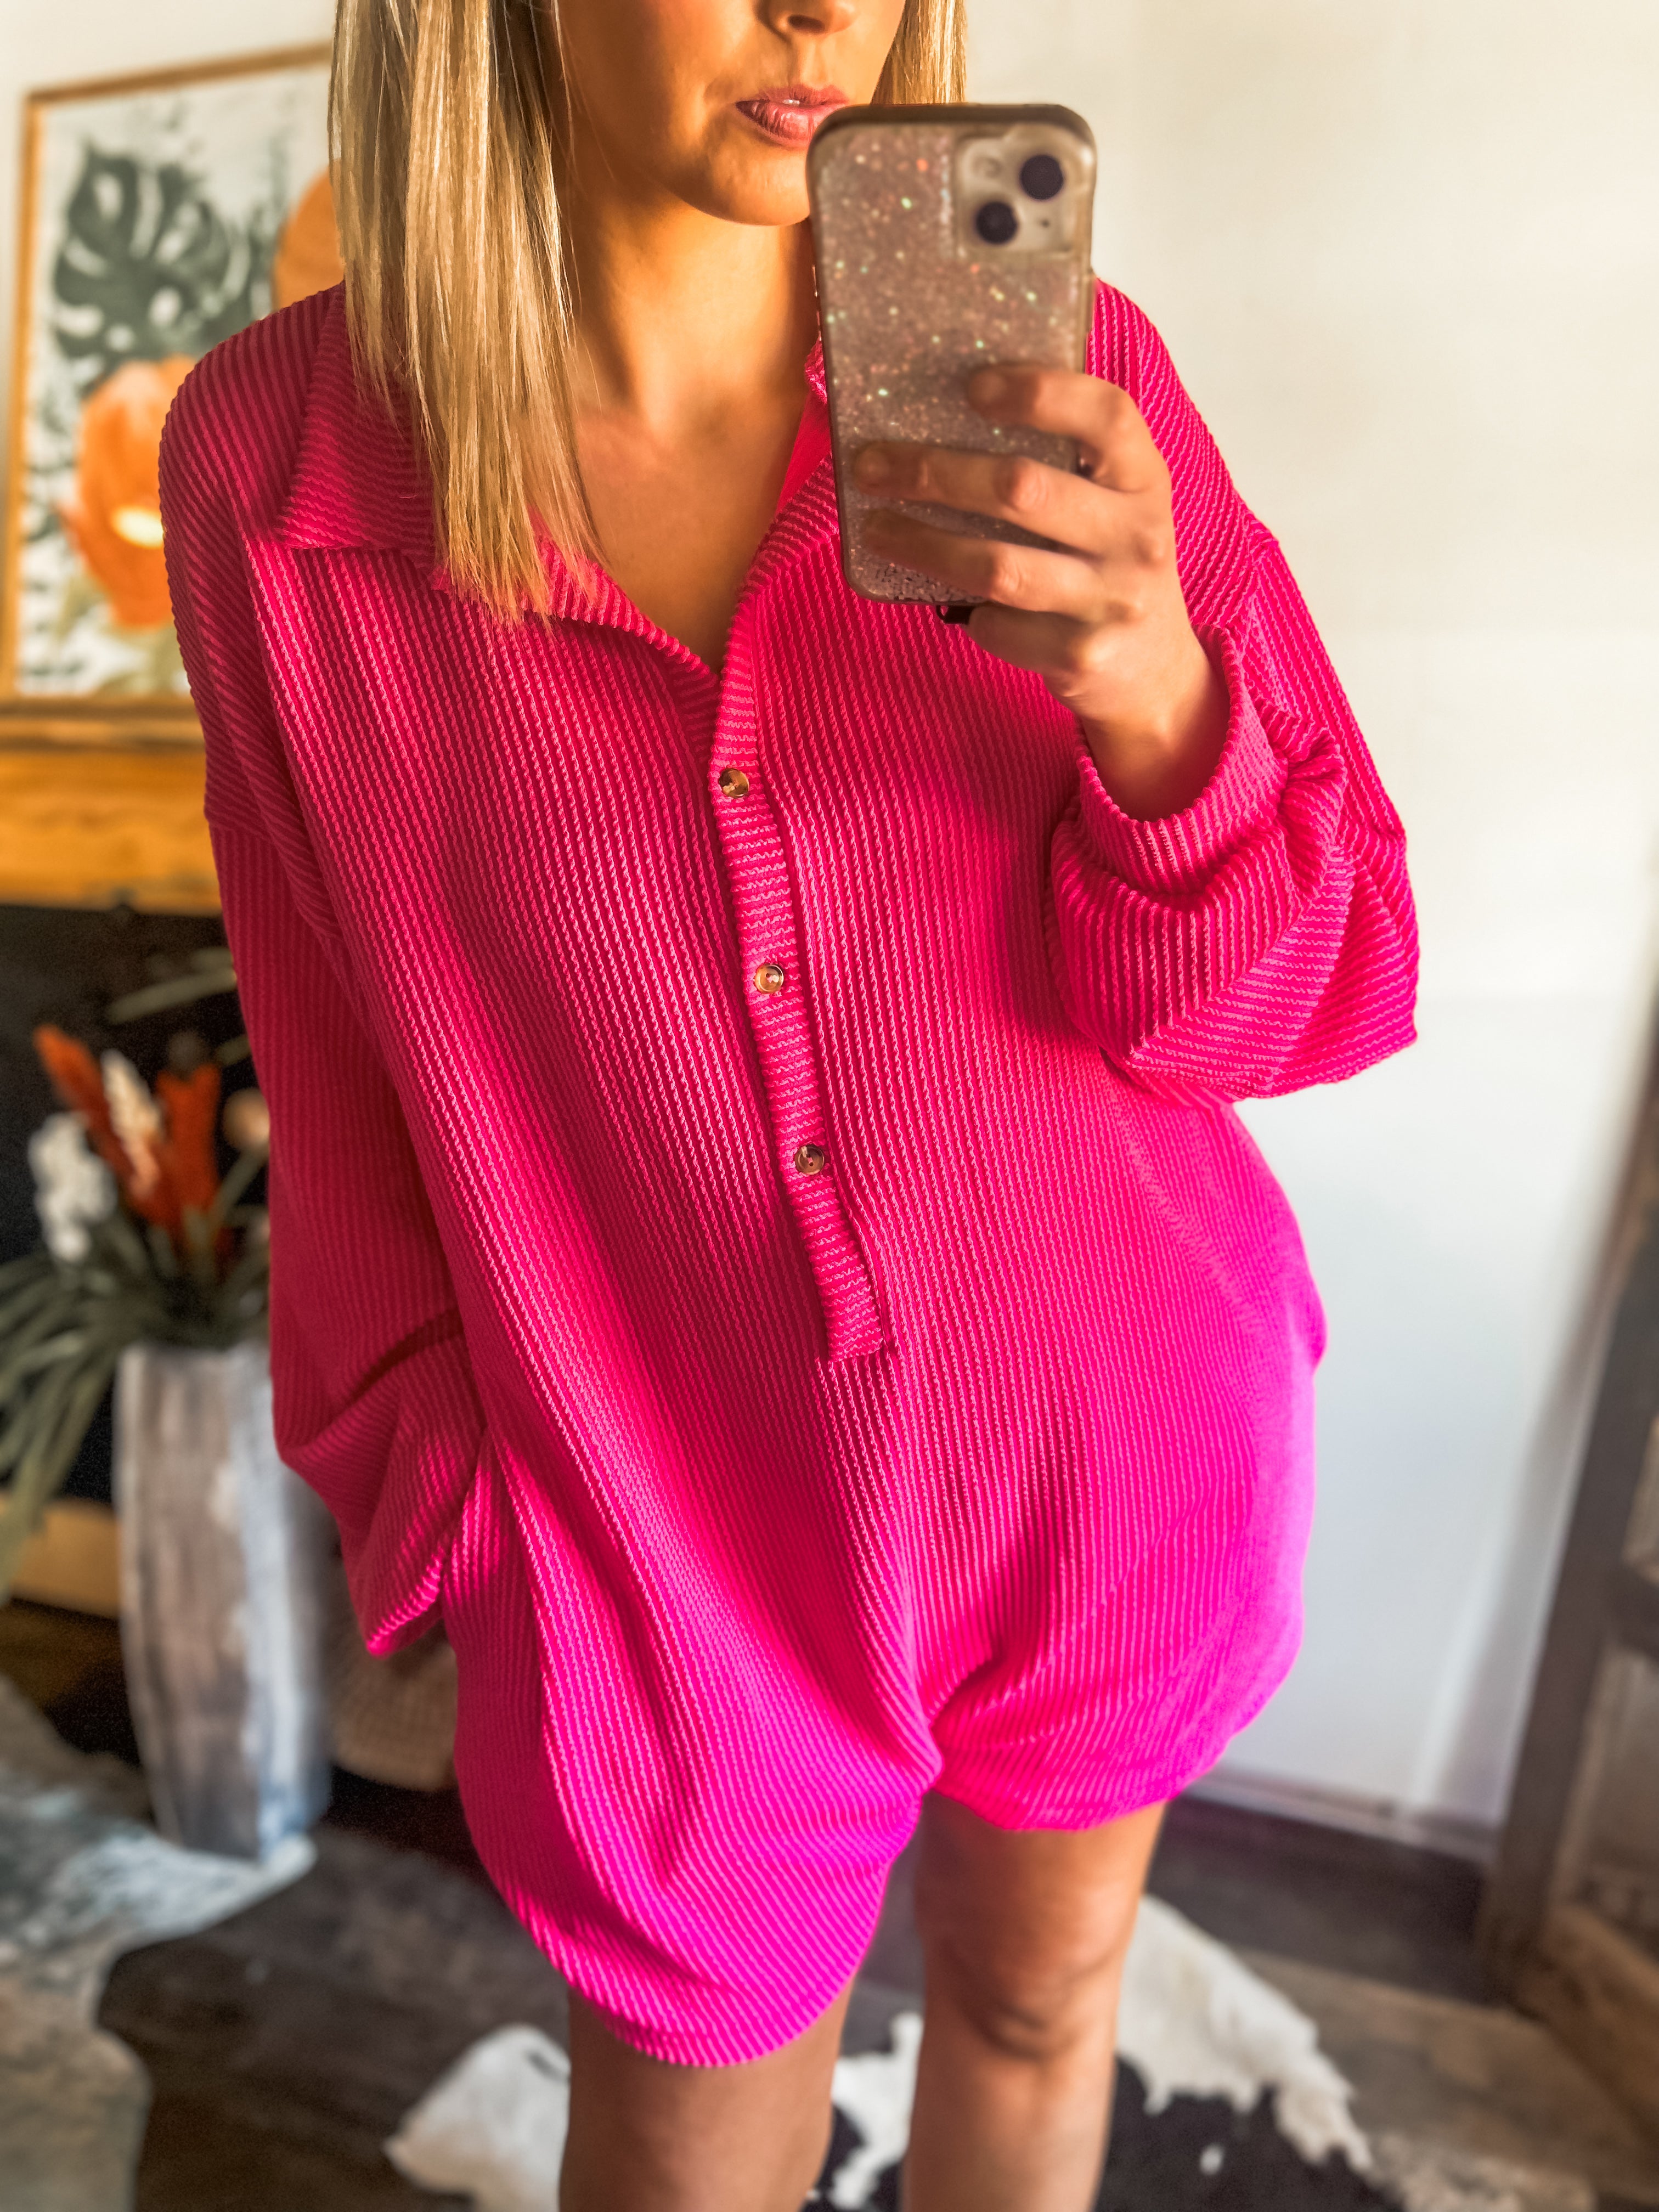 Ribbed hot pink romper